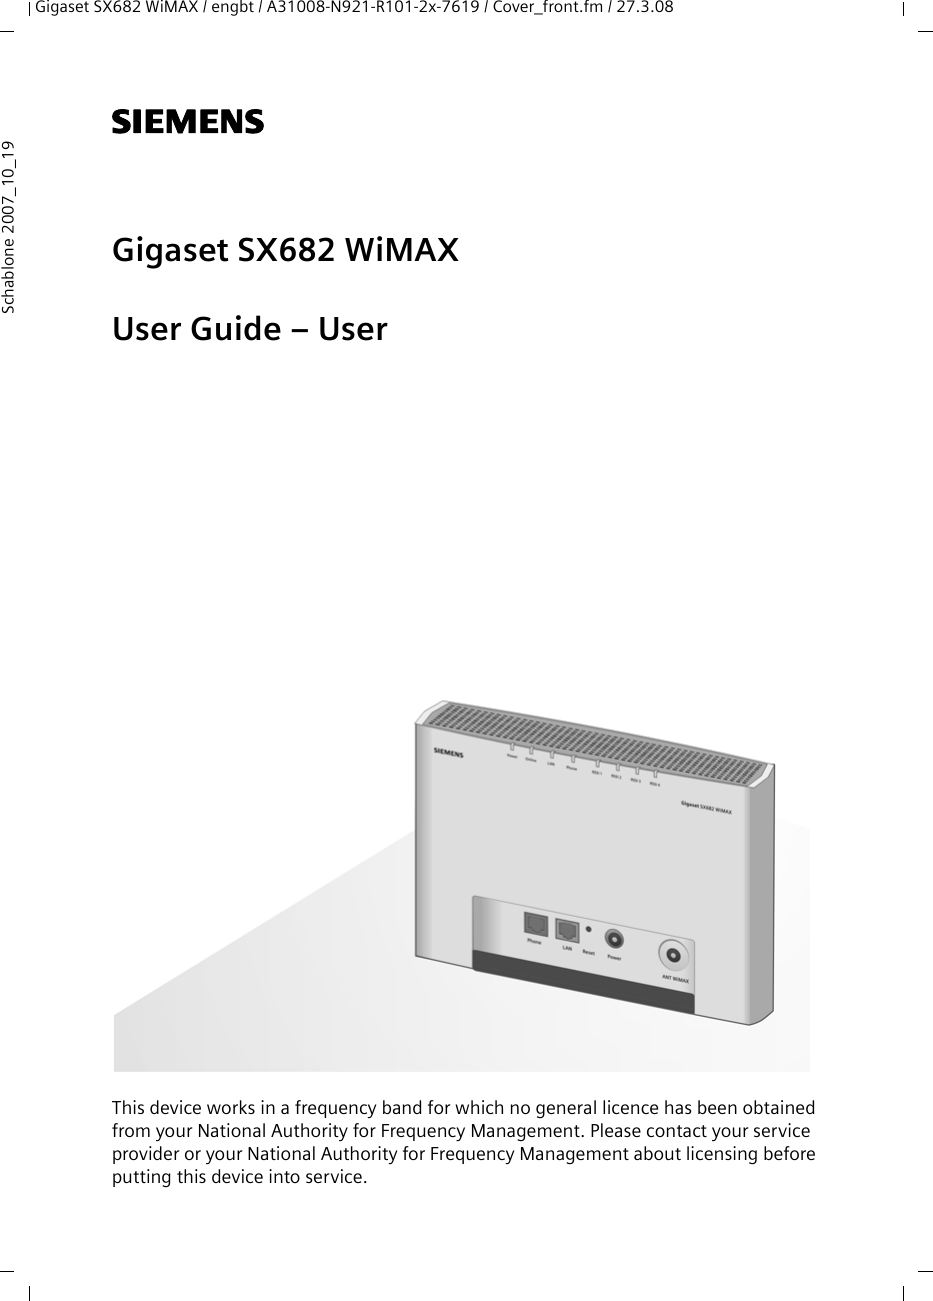 Gigaset SX682 WiMAX / engbt / A31008-N921-R101-2x-7619 / Cover_front.fm / 27.3.08Schablone 2007_10_19s Gigaset SX682 WiMAXUser Guide – UserThis device works in a frequency band for which no general licence has been obtained from your National Authority for Frequency Management. Please contact your service provider or your National Authority for Frequency Management about licensing before putting this device into service.